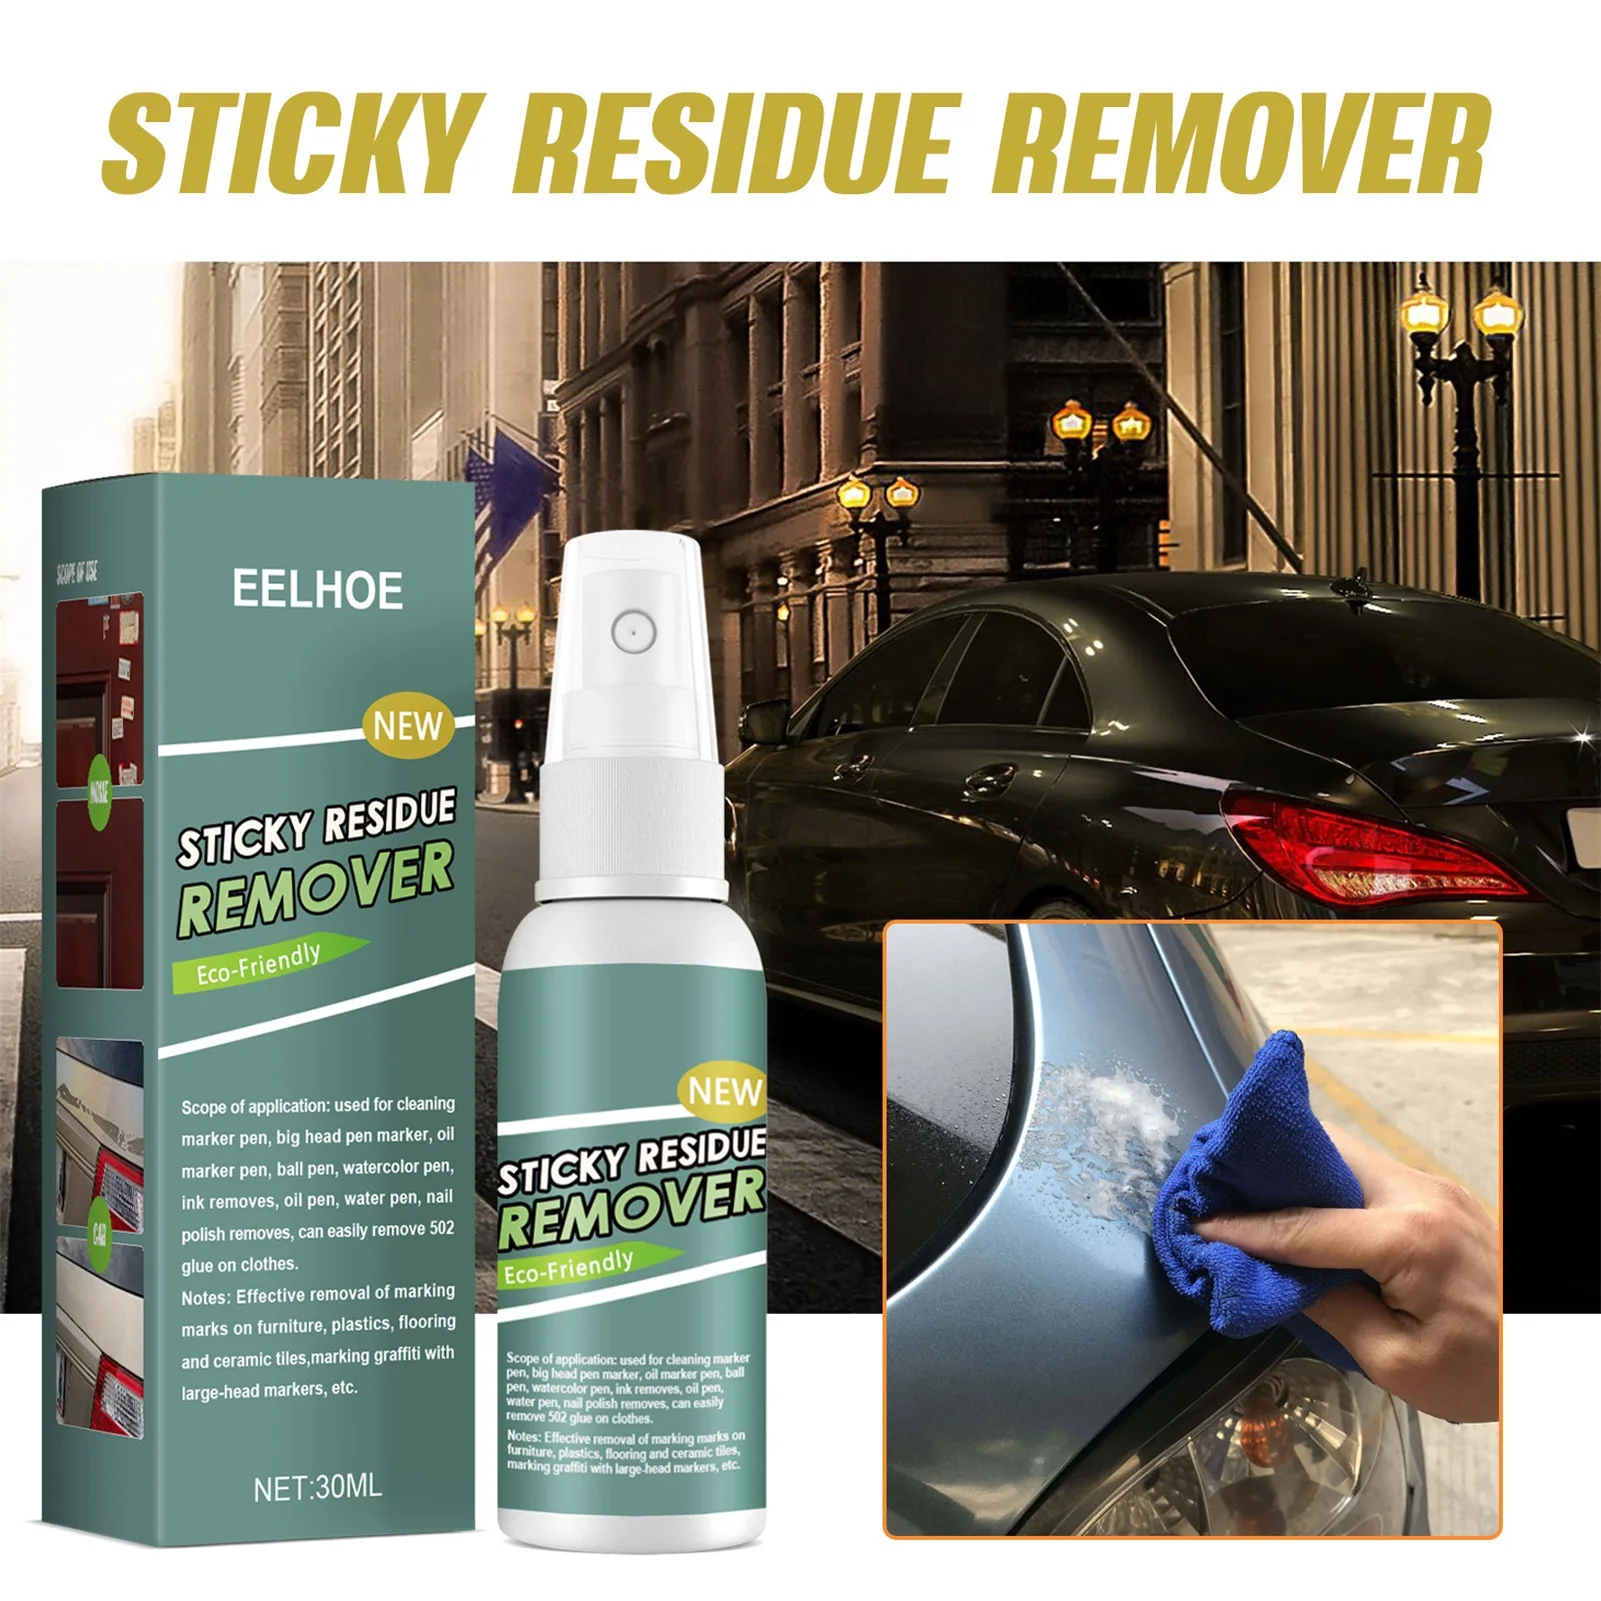 

Sticky R esidue Remover Spray Multifunctional Sticker Remover All-Purpose Cleaner Car Glass Label Cleaner Adhesive Glue Spray